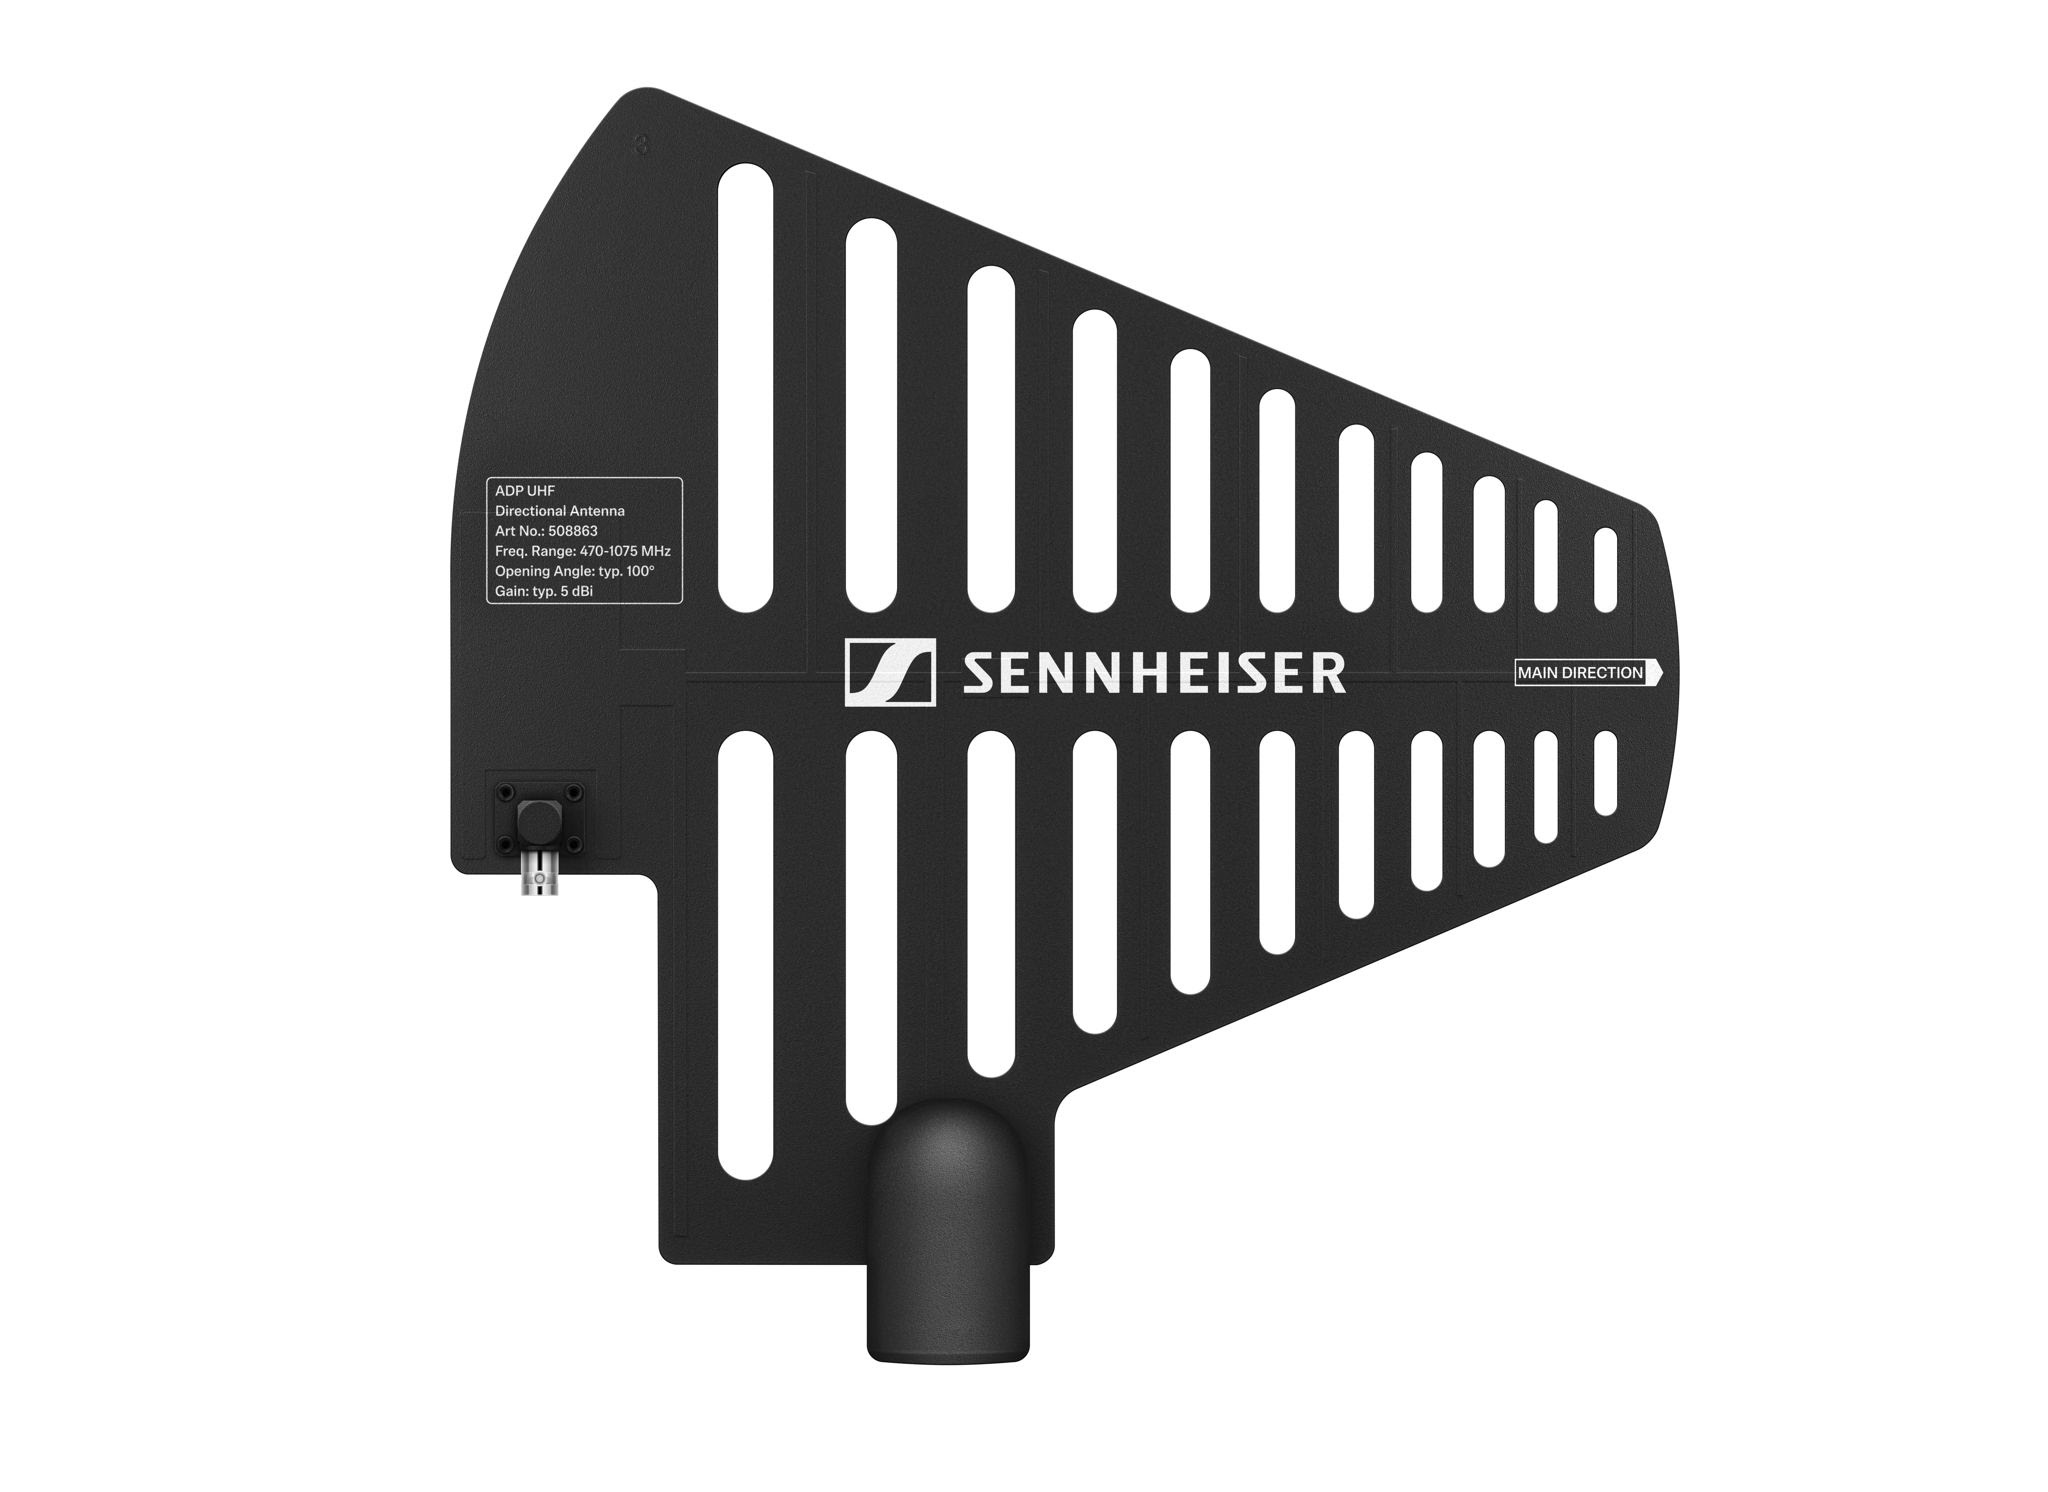 The ADP UHF remote antenna features cut-outs to reduce wind load